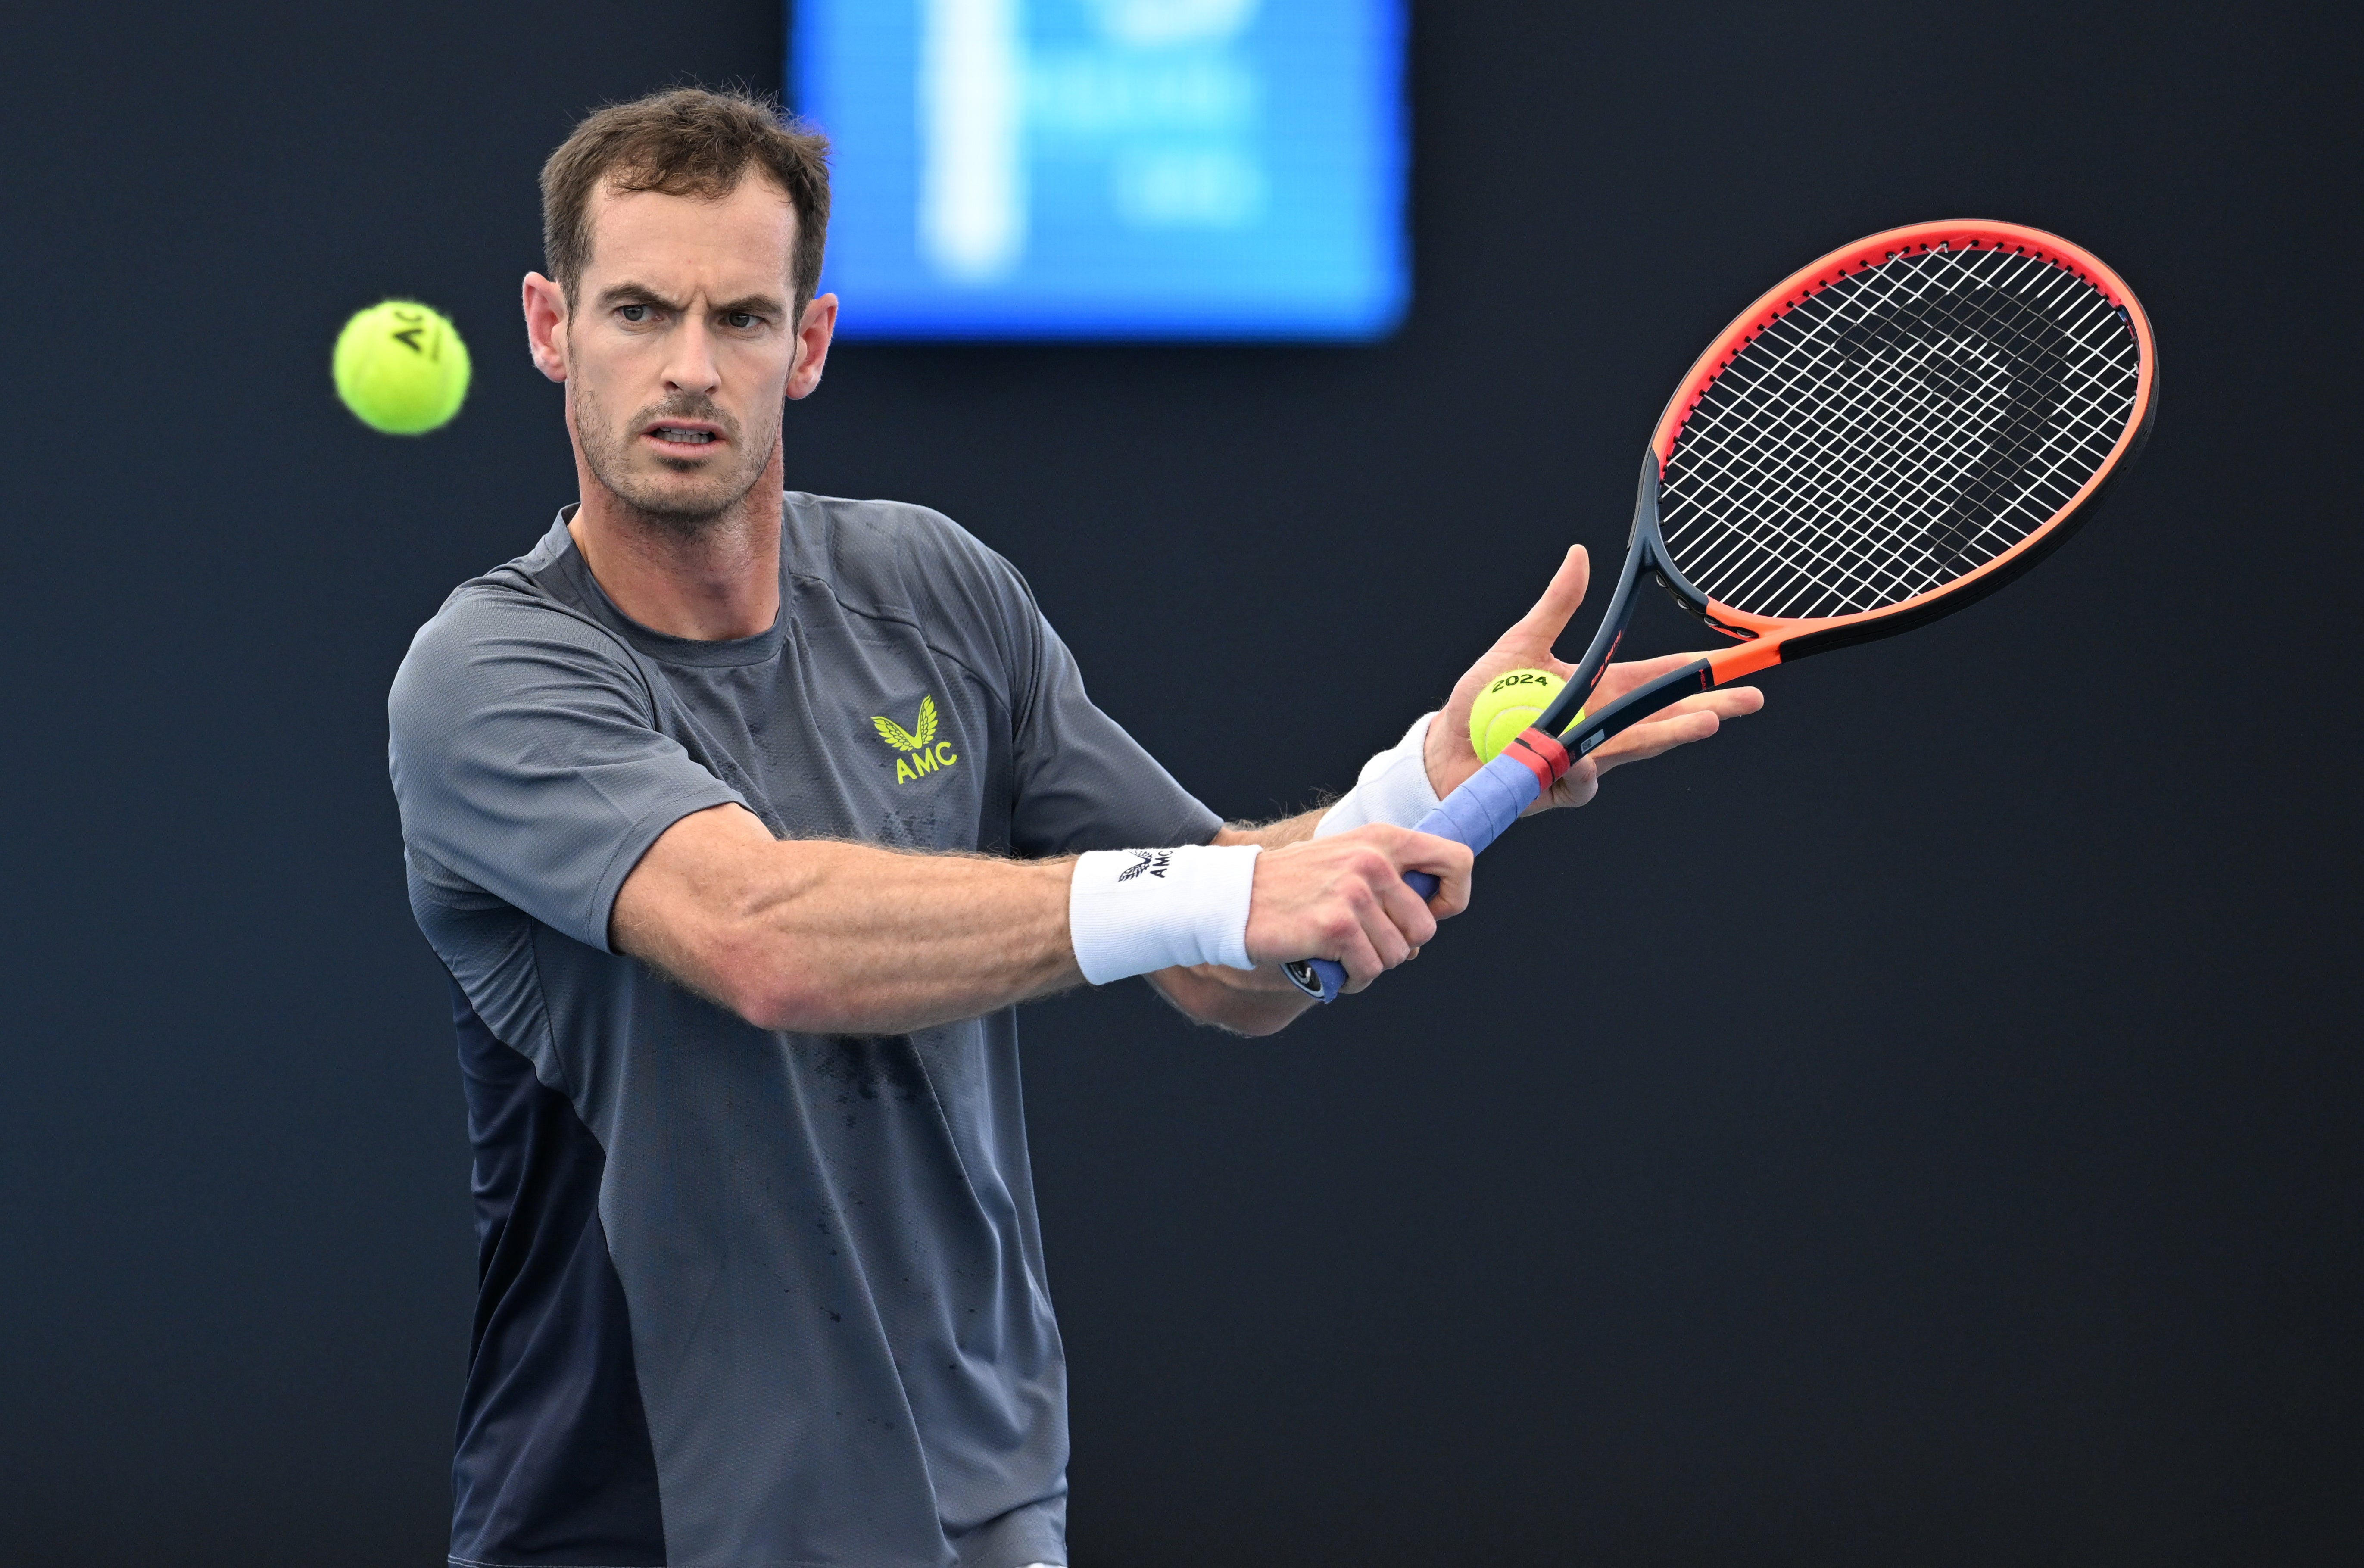 Andy Murray narrowly lost in the Qatar Open last 16